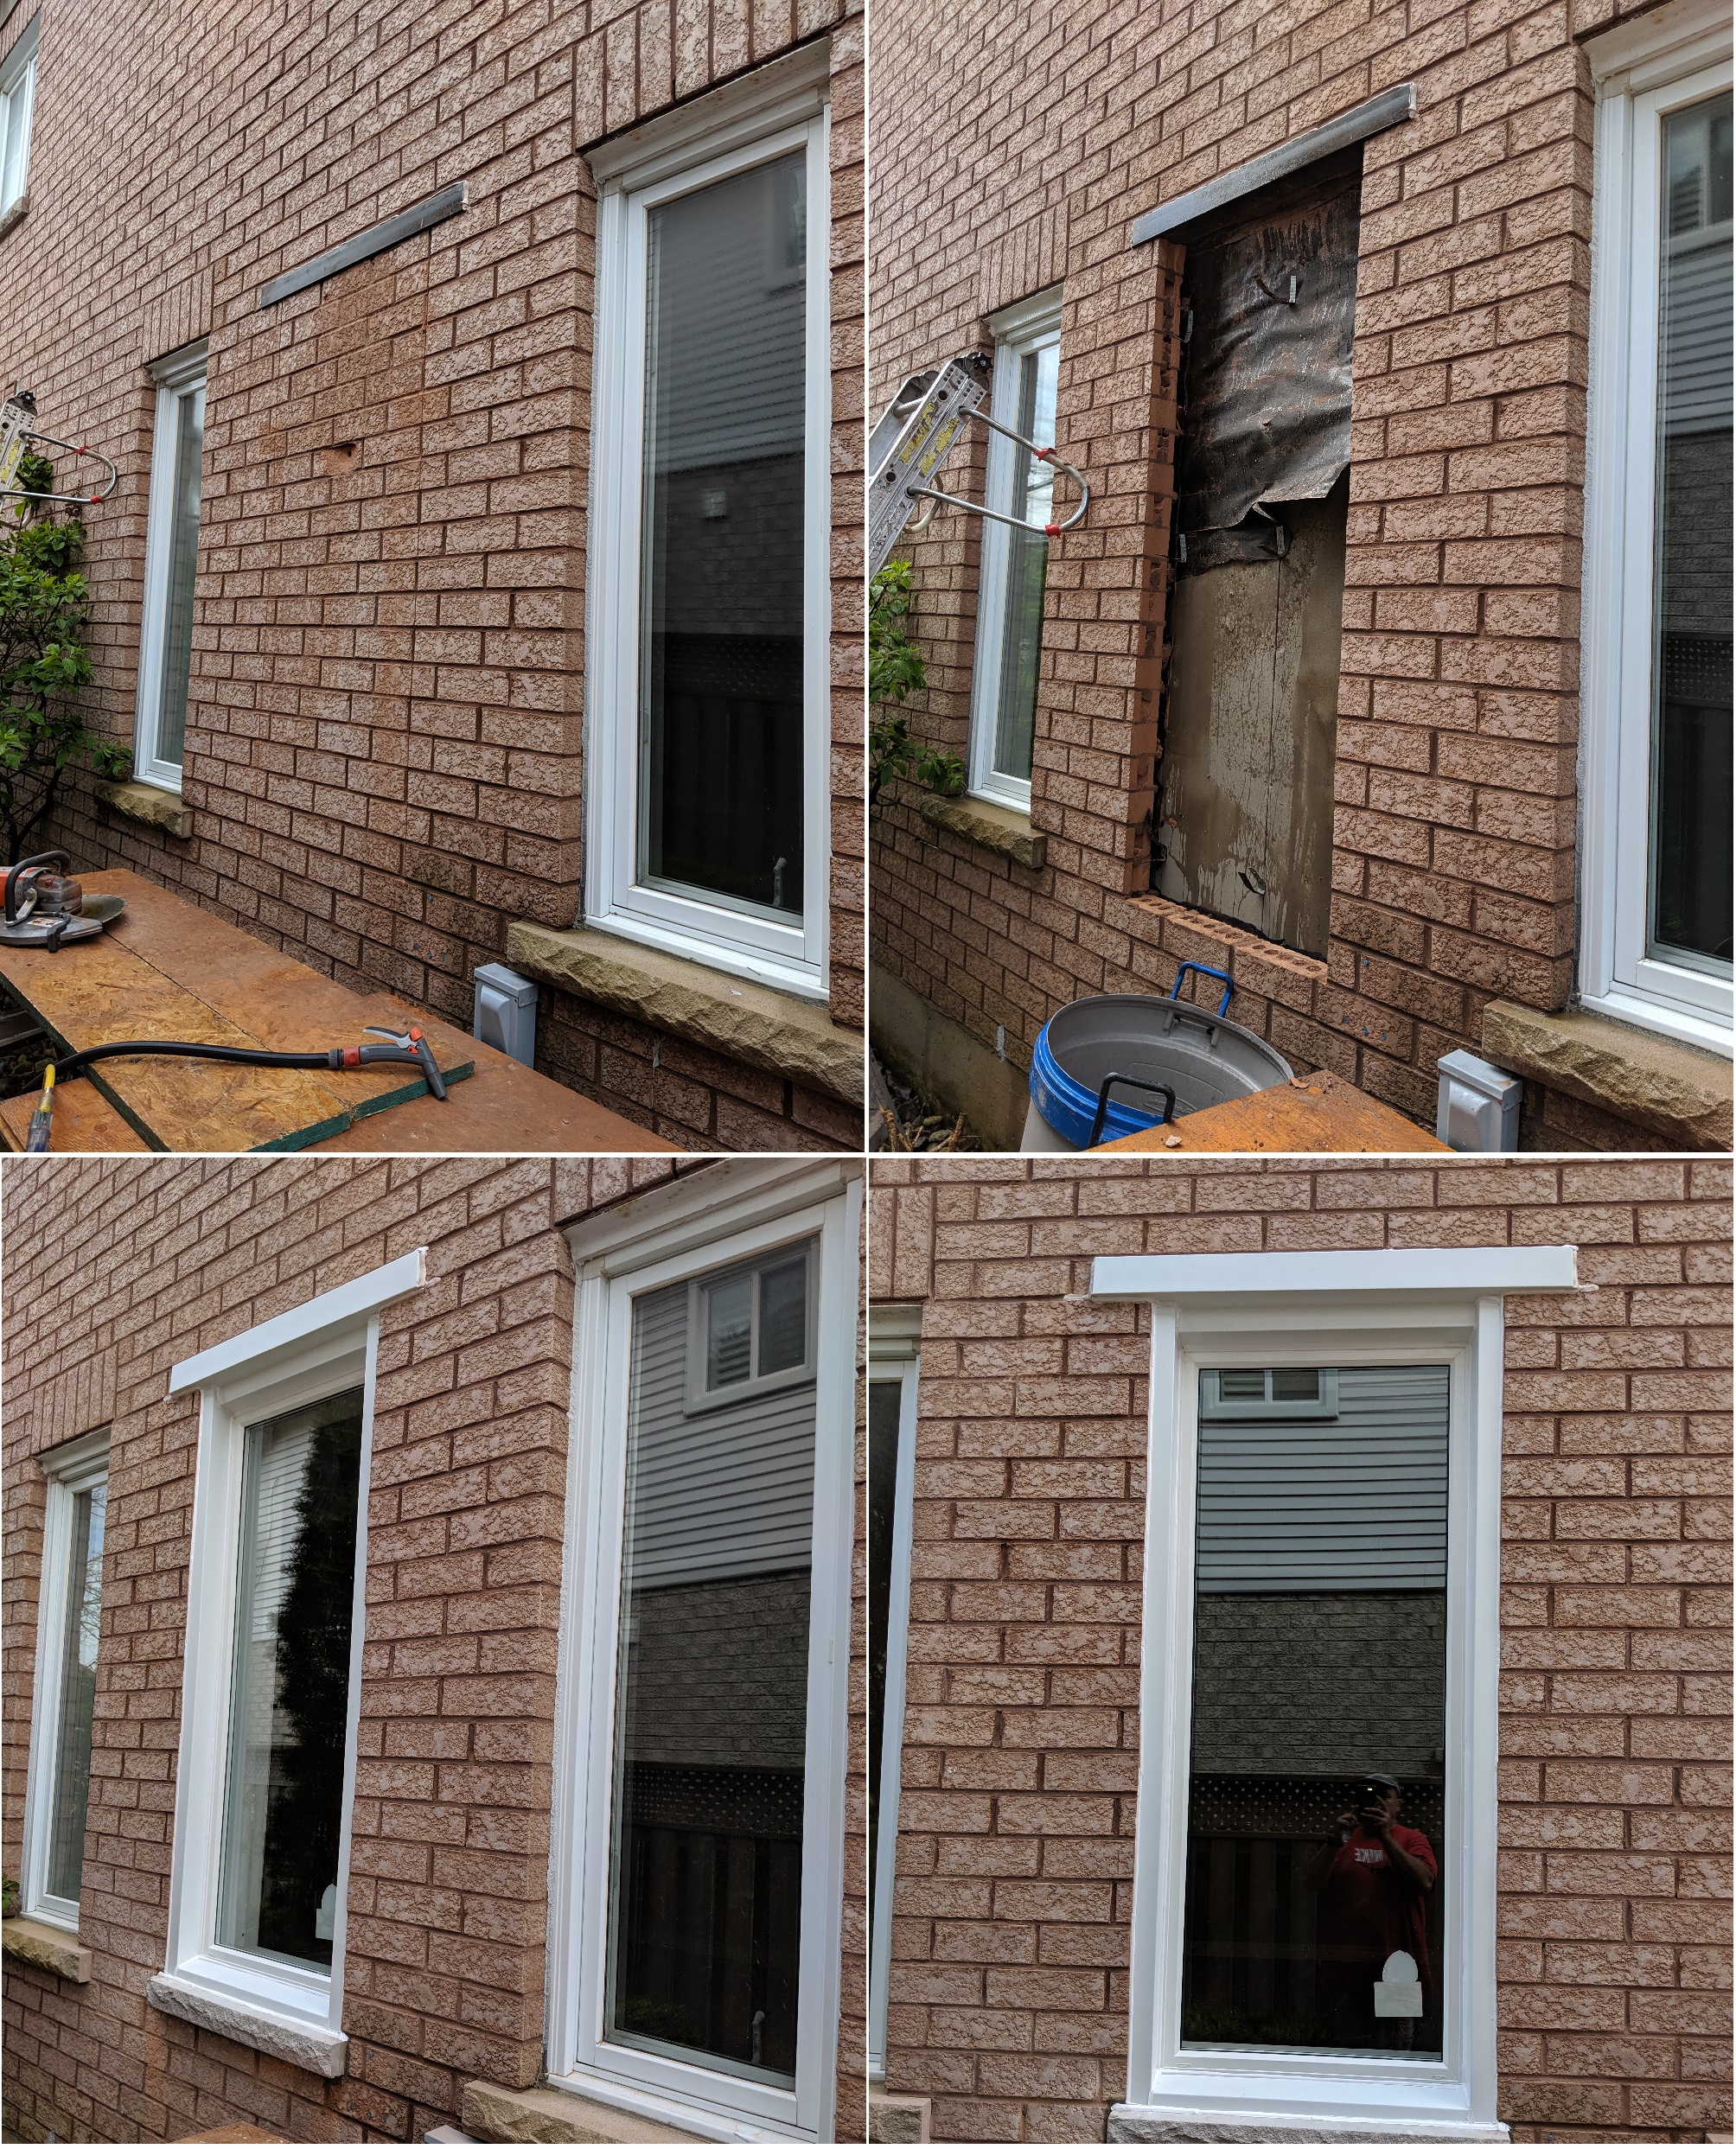 Cutting a new window opening. The window did not exist before. Cut brick, concrete bottom seal installation, lintel installation, aluminum capping flashing outside. Casing trim inside.  The Middle window had to be in between two existing windows. 